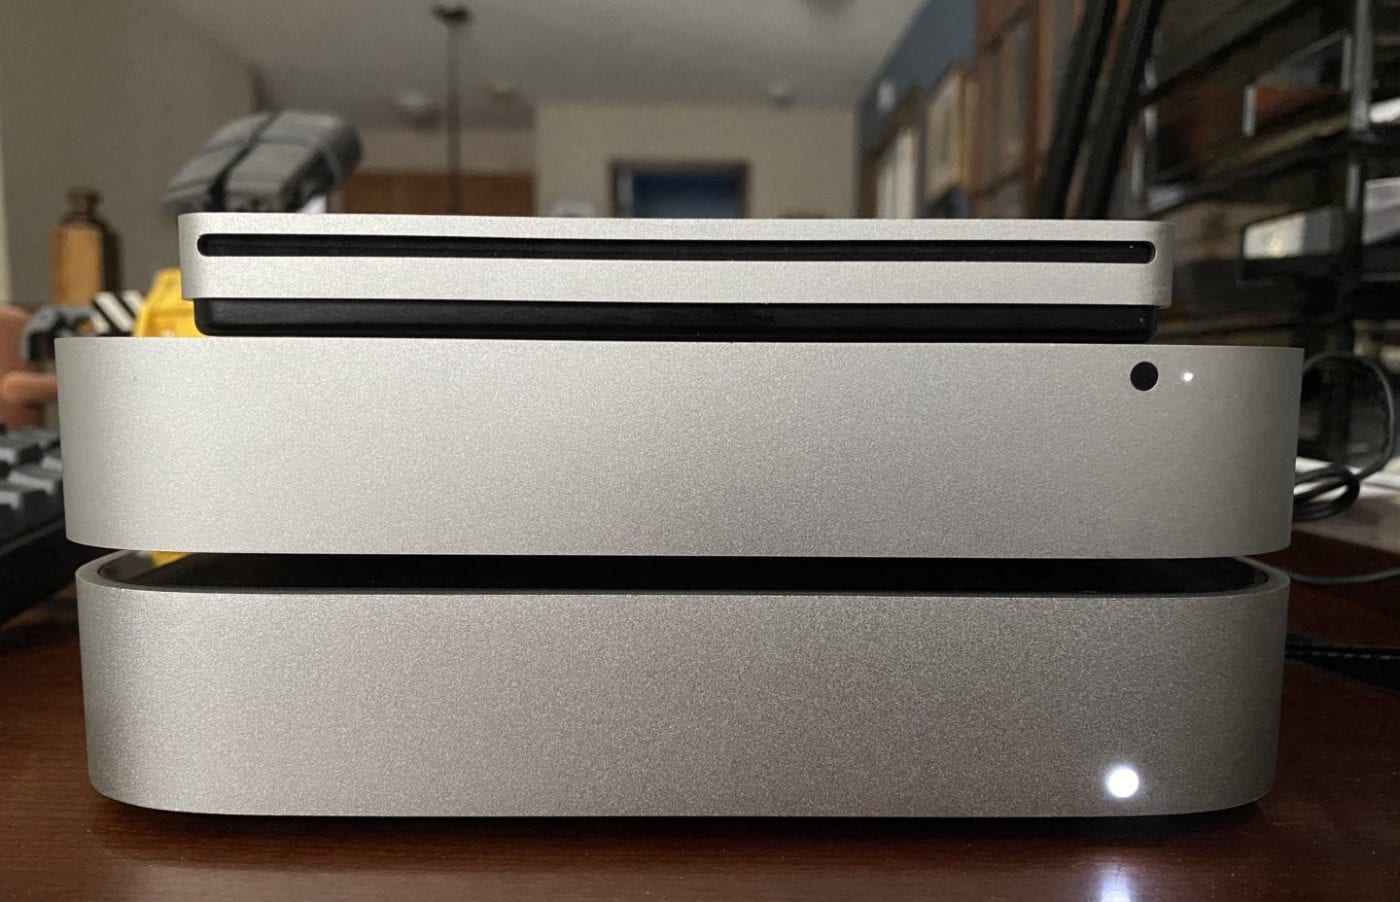 The Media Server. From top, an Apple SuperDrive, the 2014 Mac mini, and an 8TB OWC miniStack drive